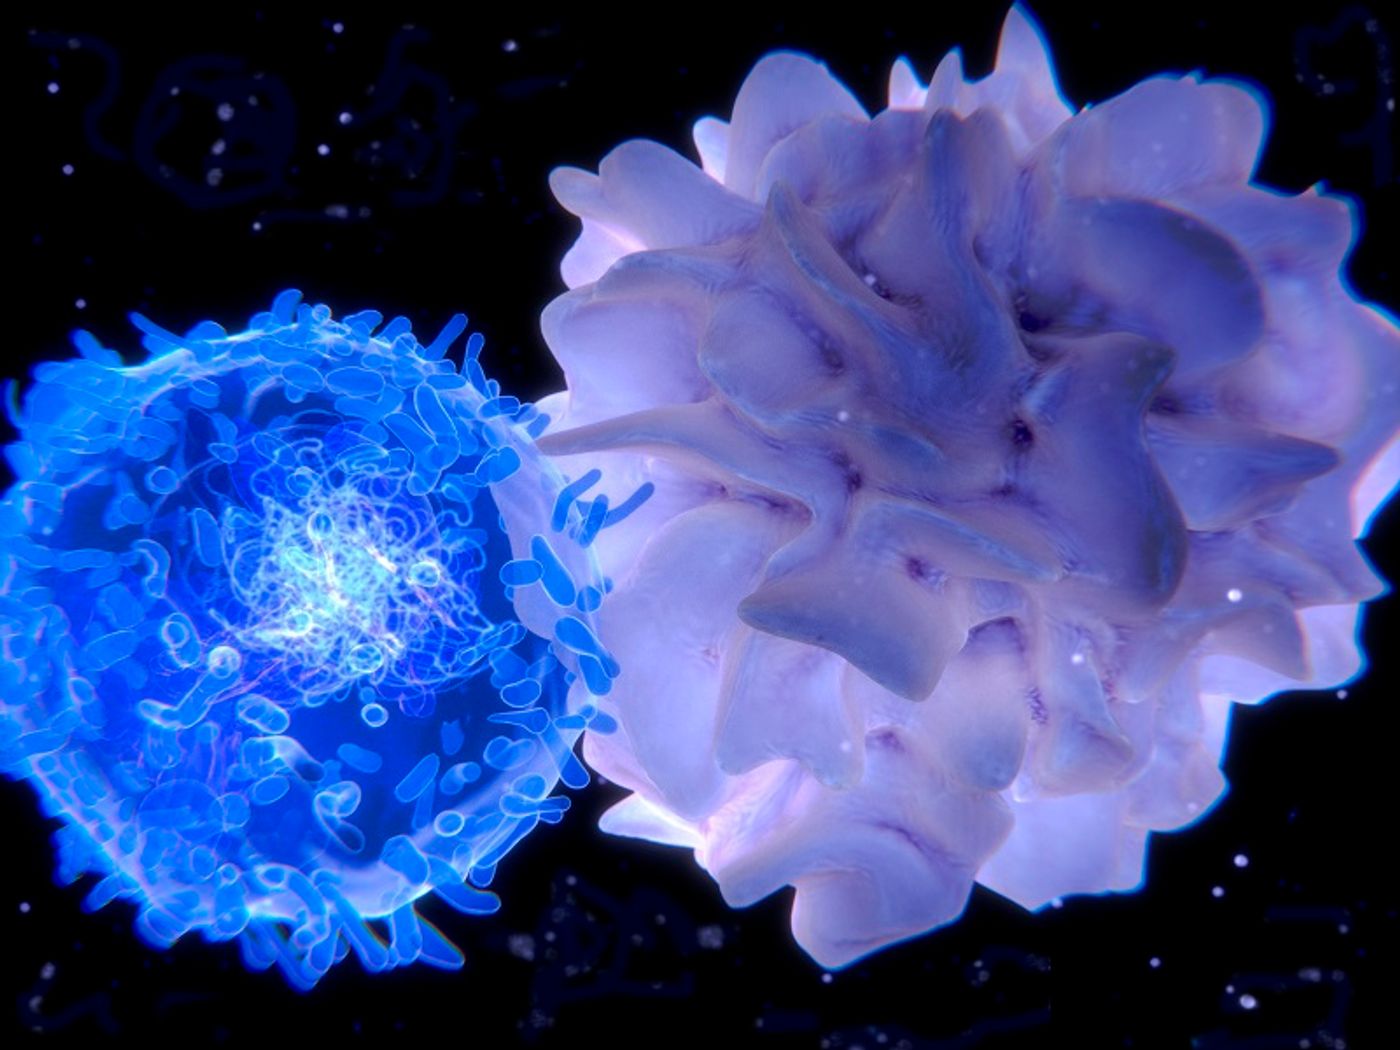 Dendritic cells prime T cells for attack against antigens. Credit: HemaCare